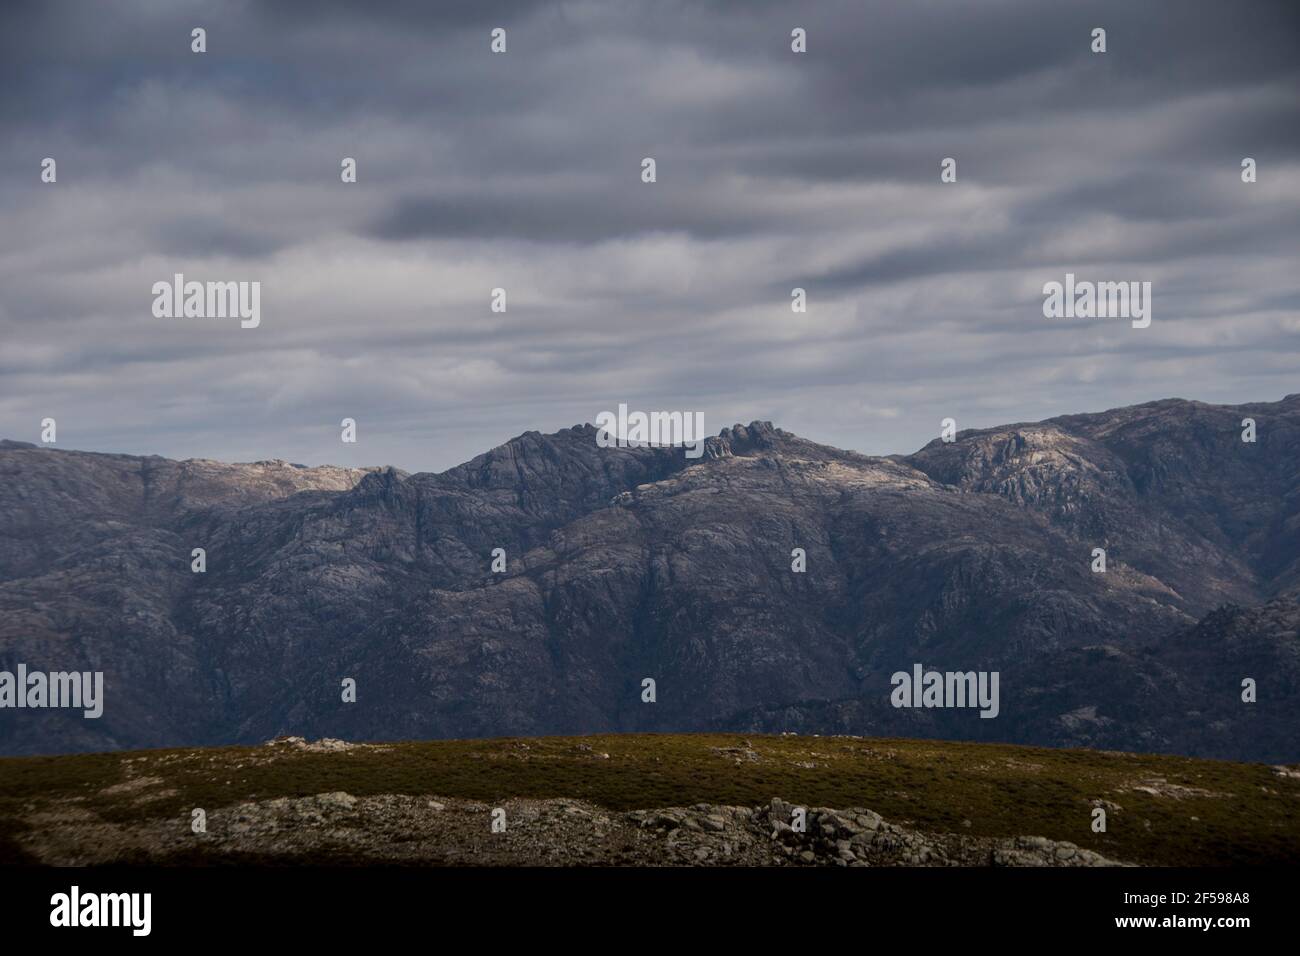 Mountain rocky landscape in a cloudy spring day, as the shadow from the clouds cover the landscape rocky peaks Stock Photo